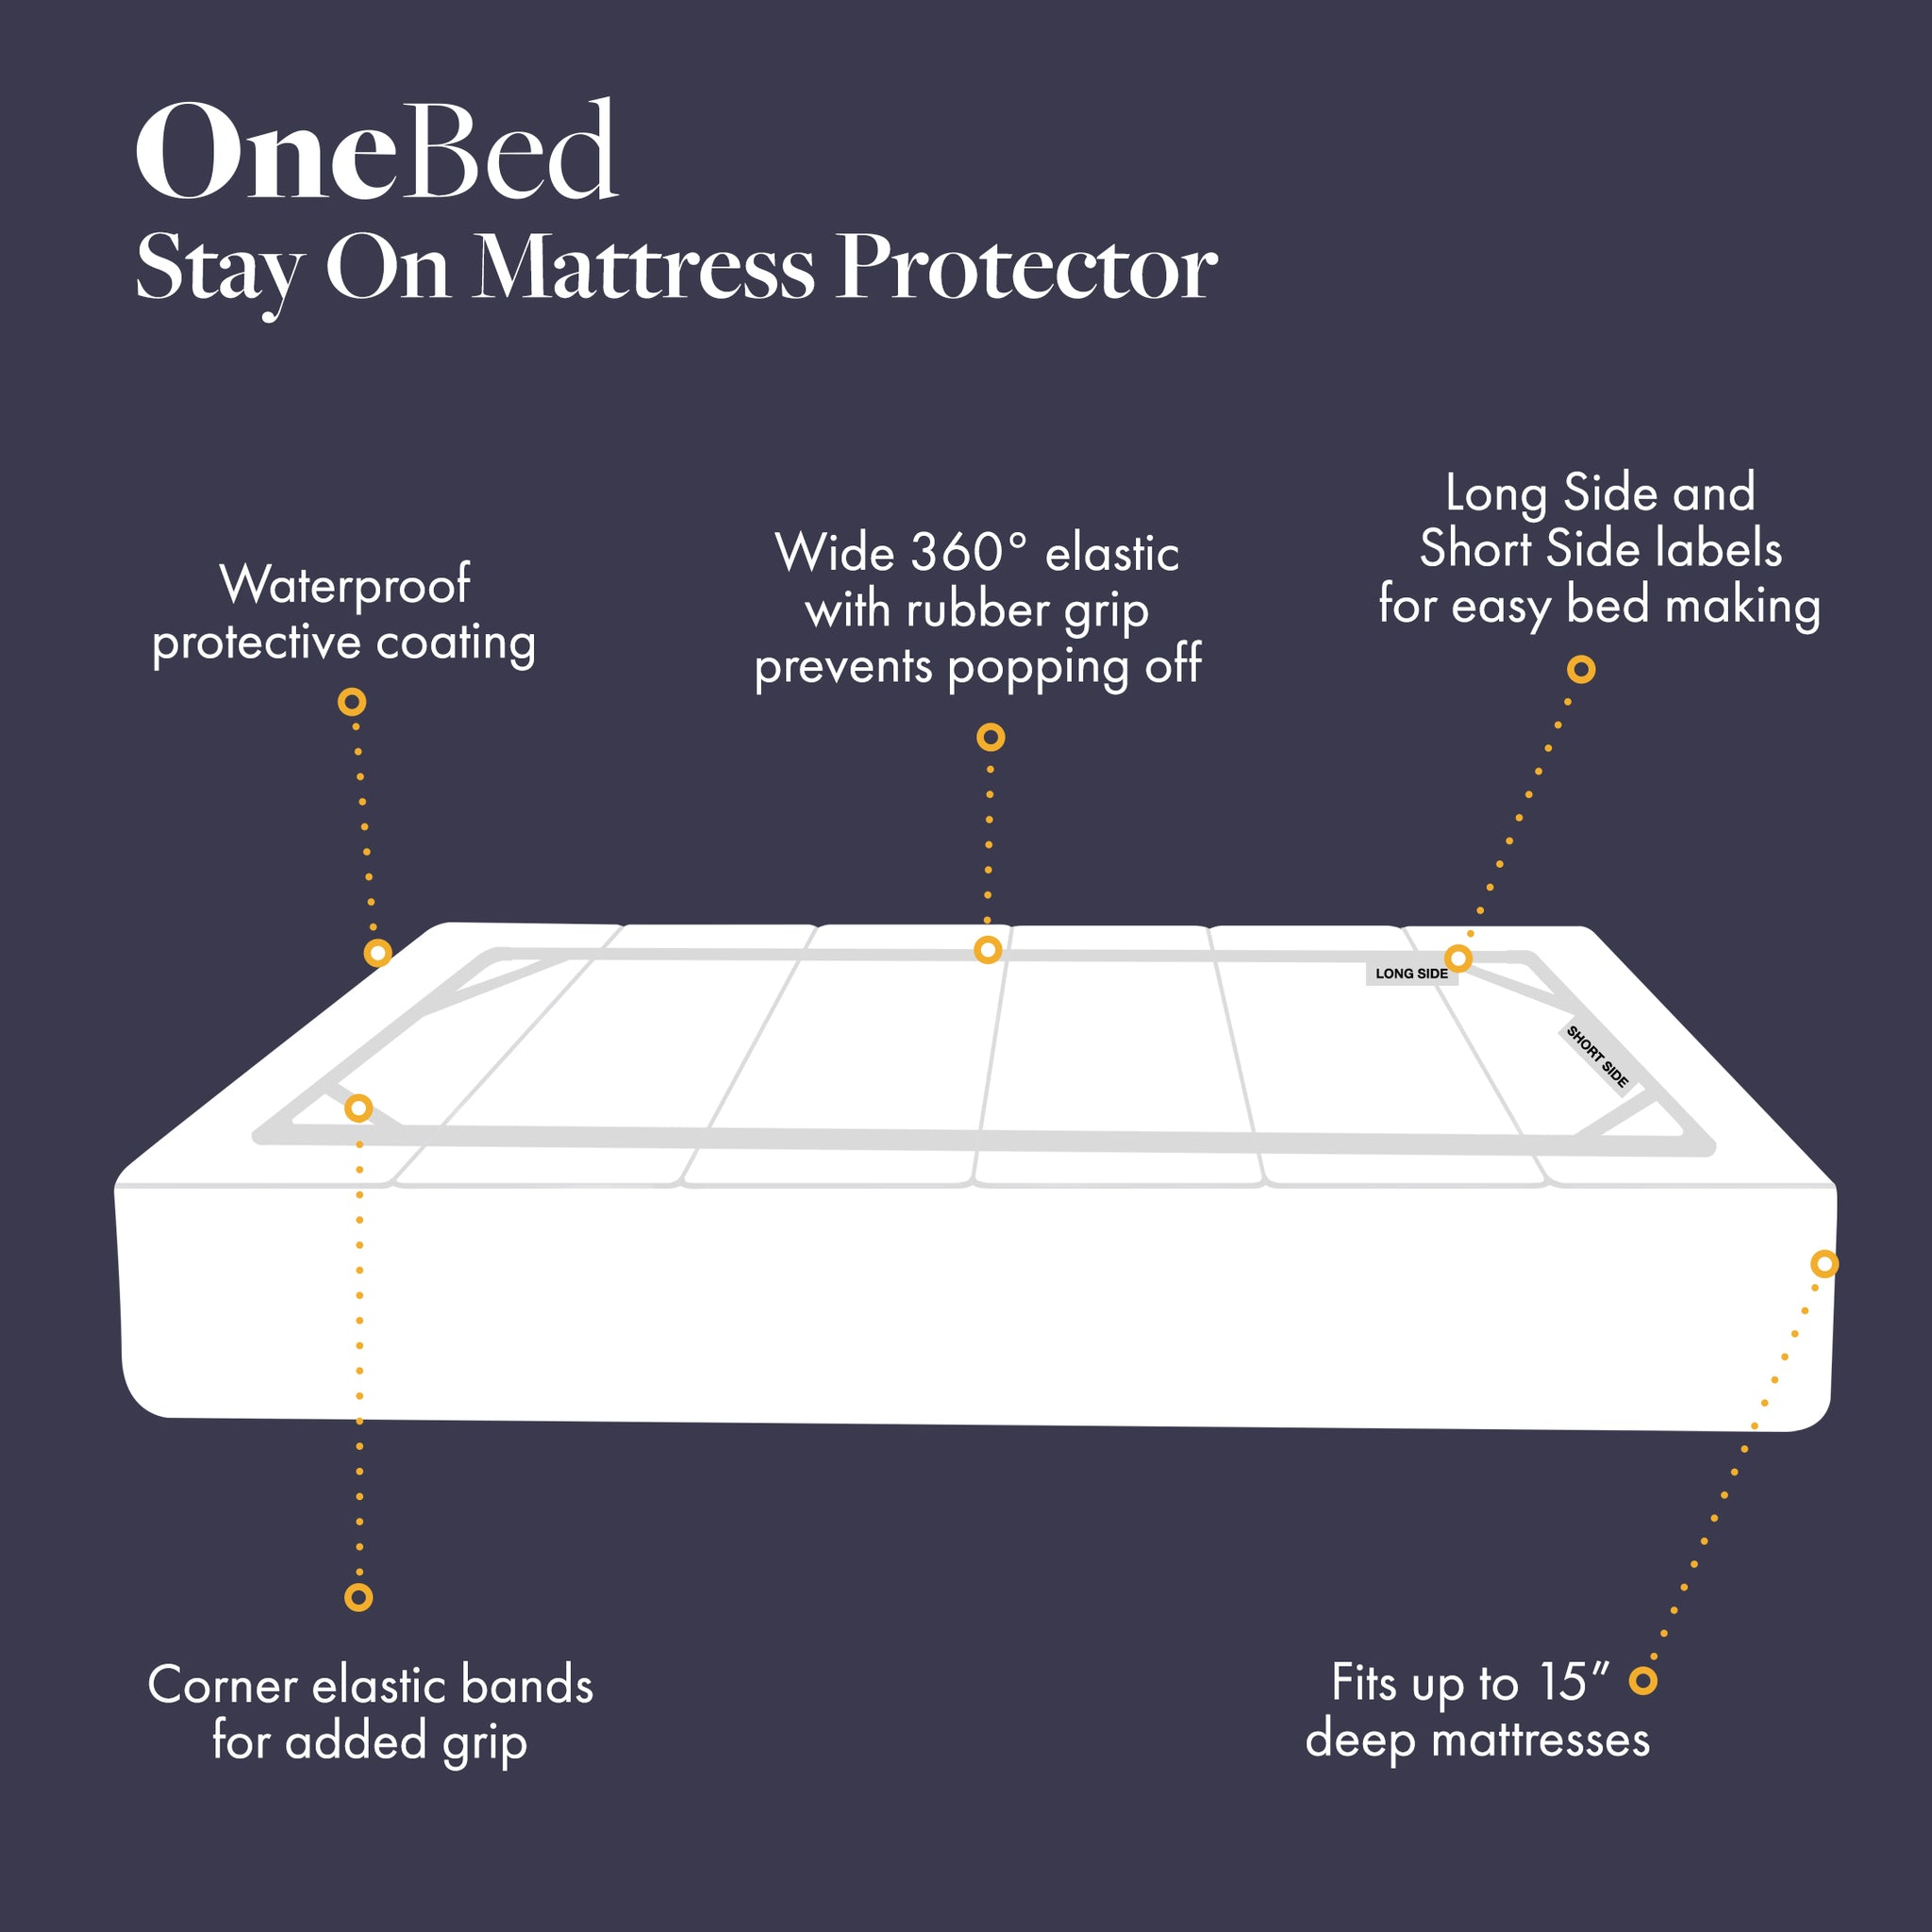 Mattress Covers and Protection - One Bed